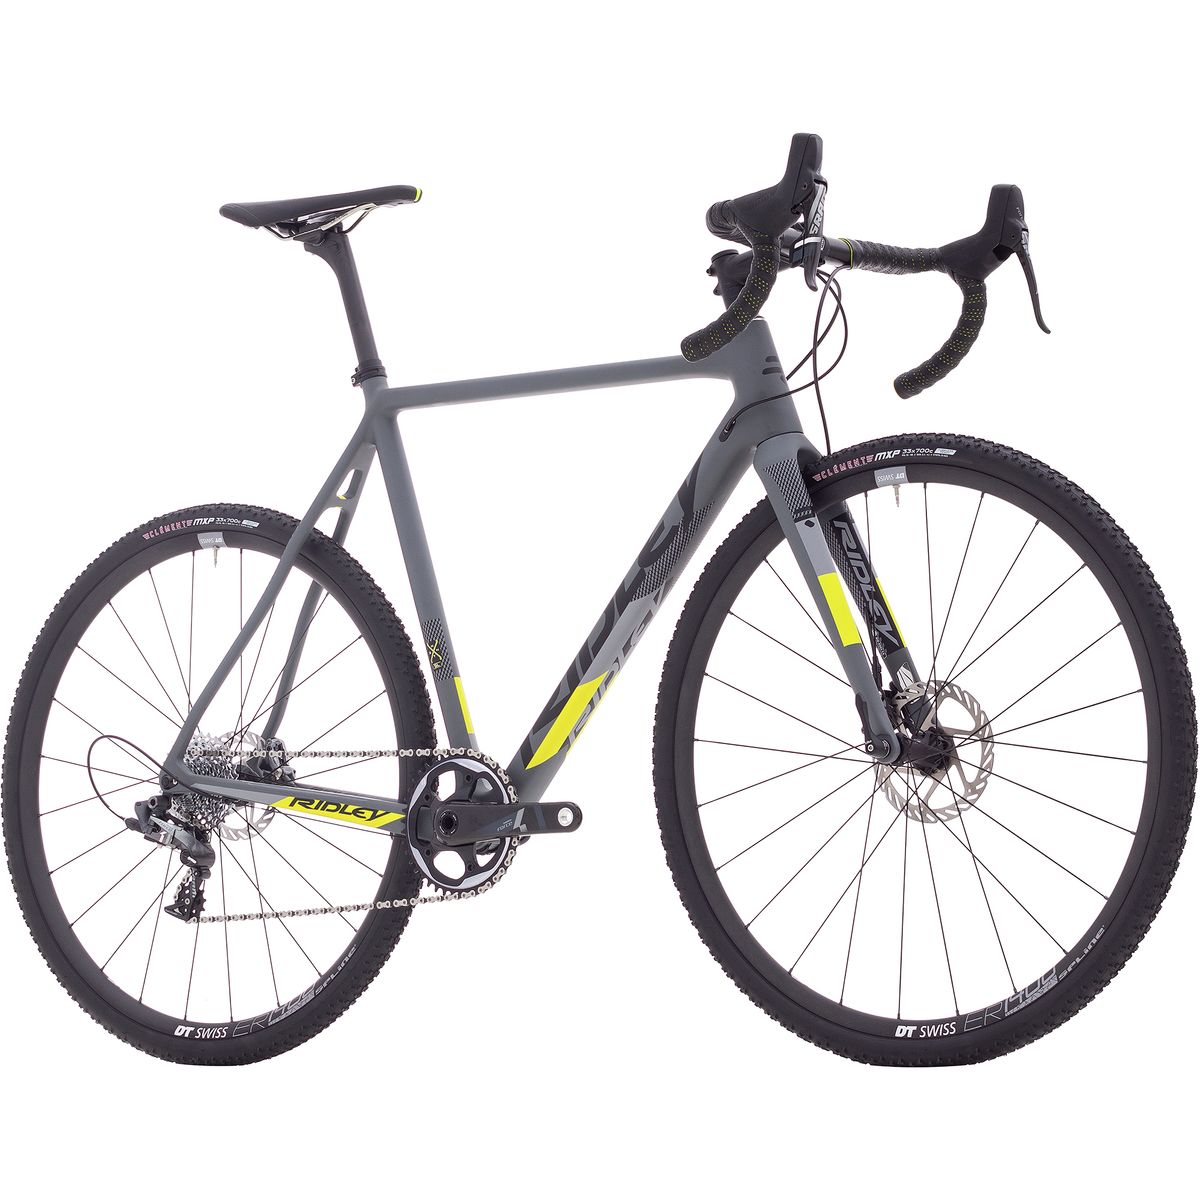 Ridley X-Night SL Disc Force 1 Complete Cyclocross Bike - 2018